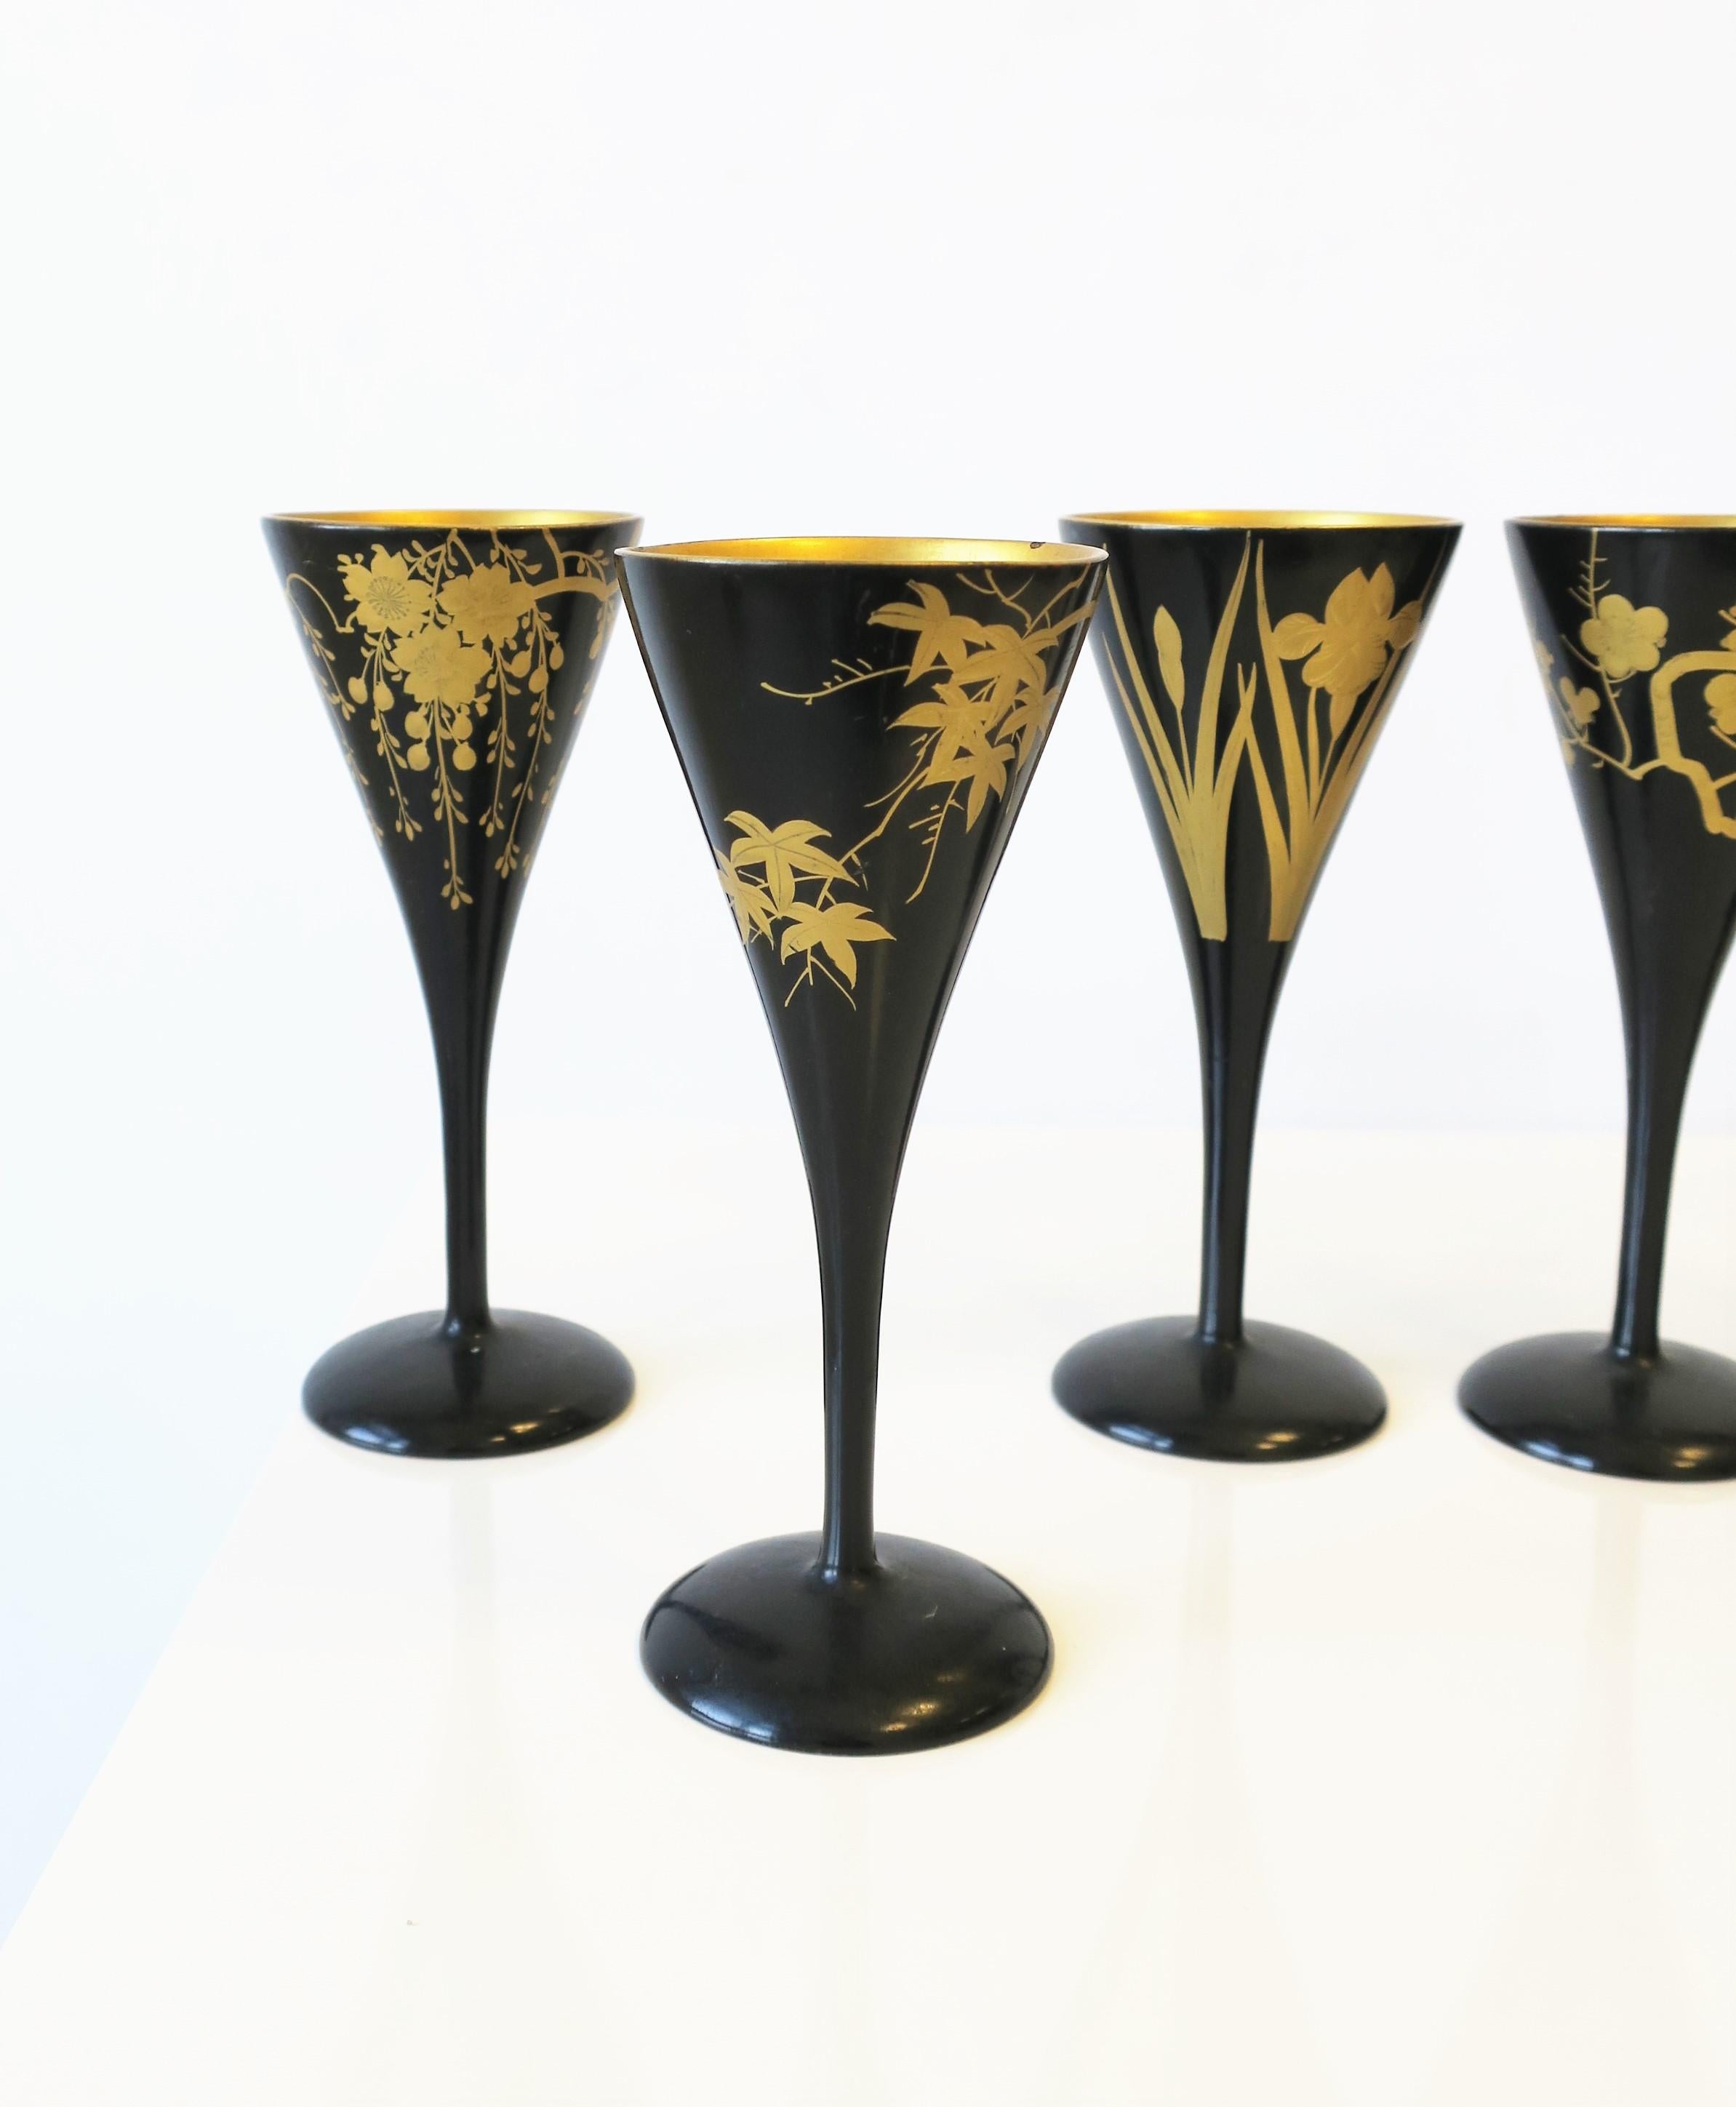 20th Century Japanese Black Lacquer & Gold Sake, Champagne Flutes or Wine Stemware, Set of 6 For Sale